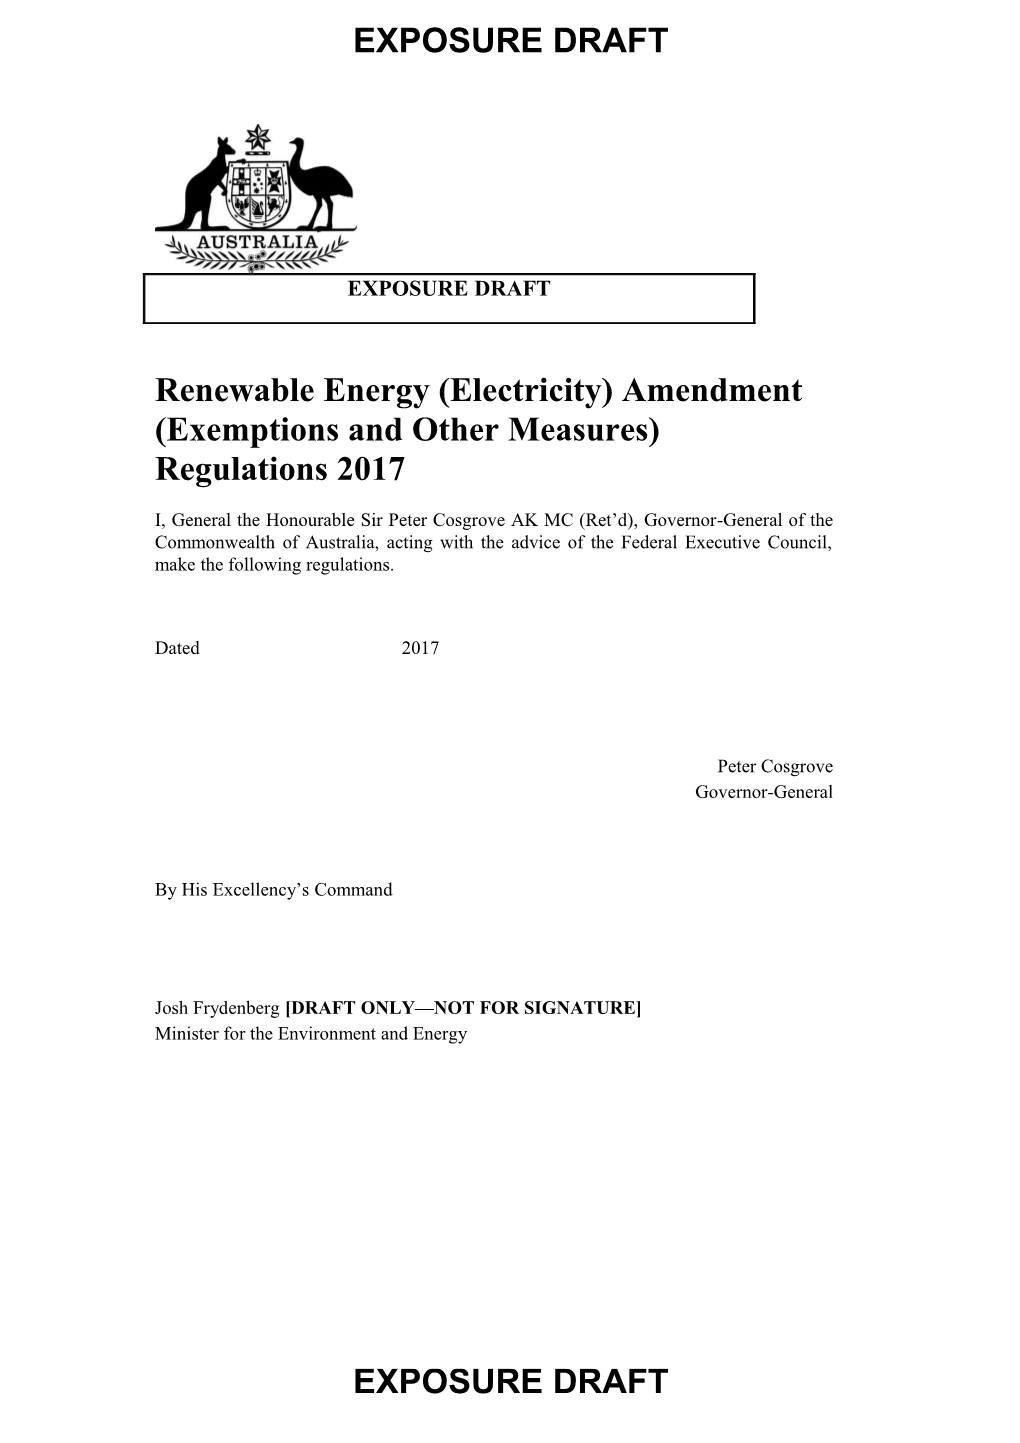 Renewable Energy (Electricity) Amendment (Exemptions and Other Measures) Regulations 2017